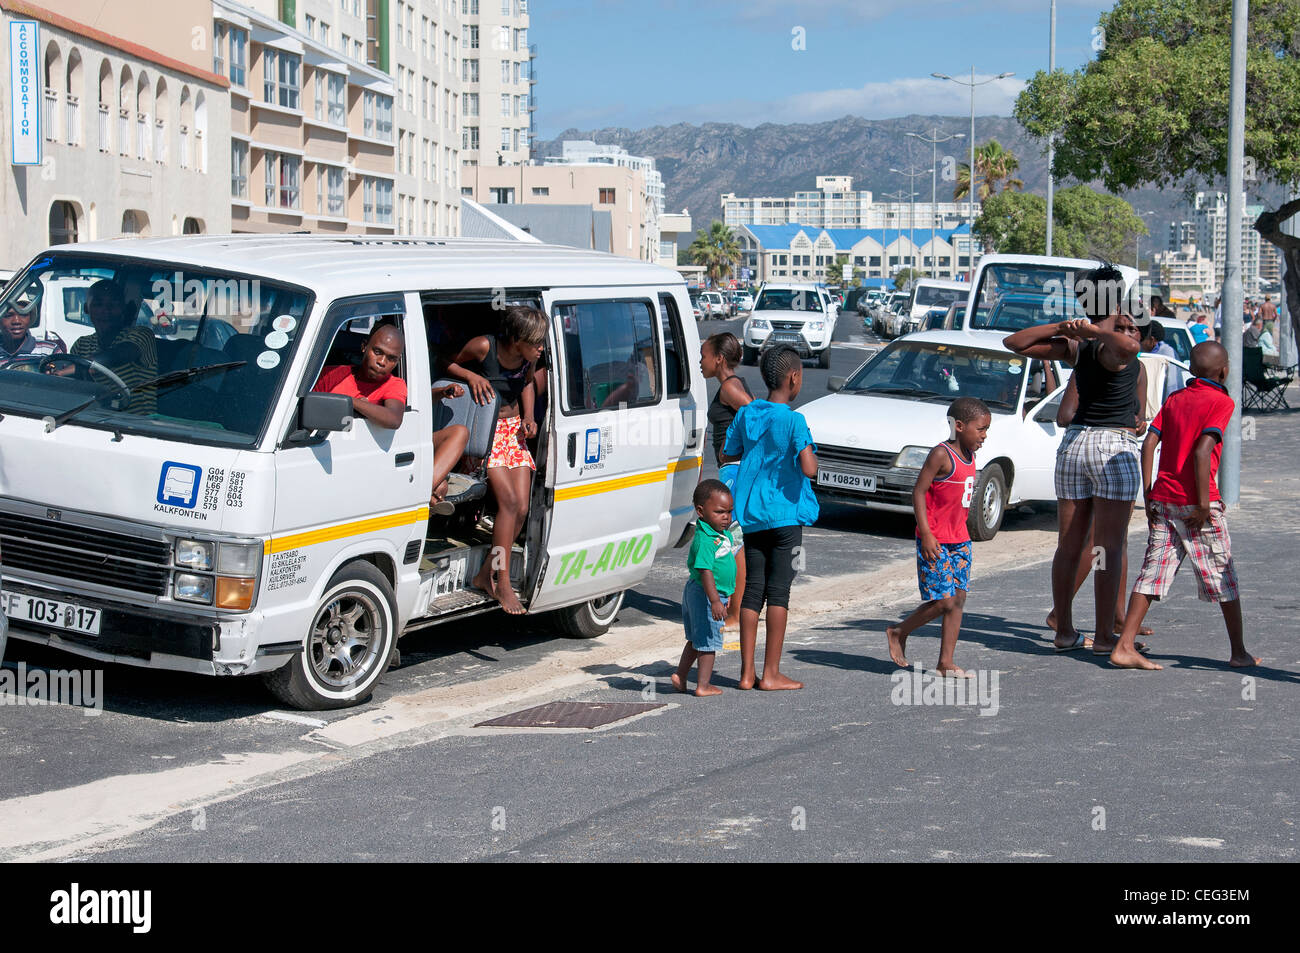 Taxi passengers arriving at the seaside town Strand Western Cape South Africa Stock Photo